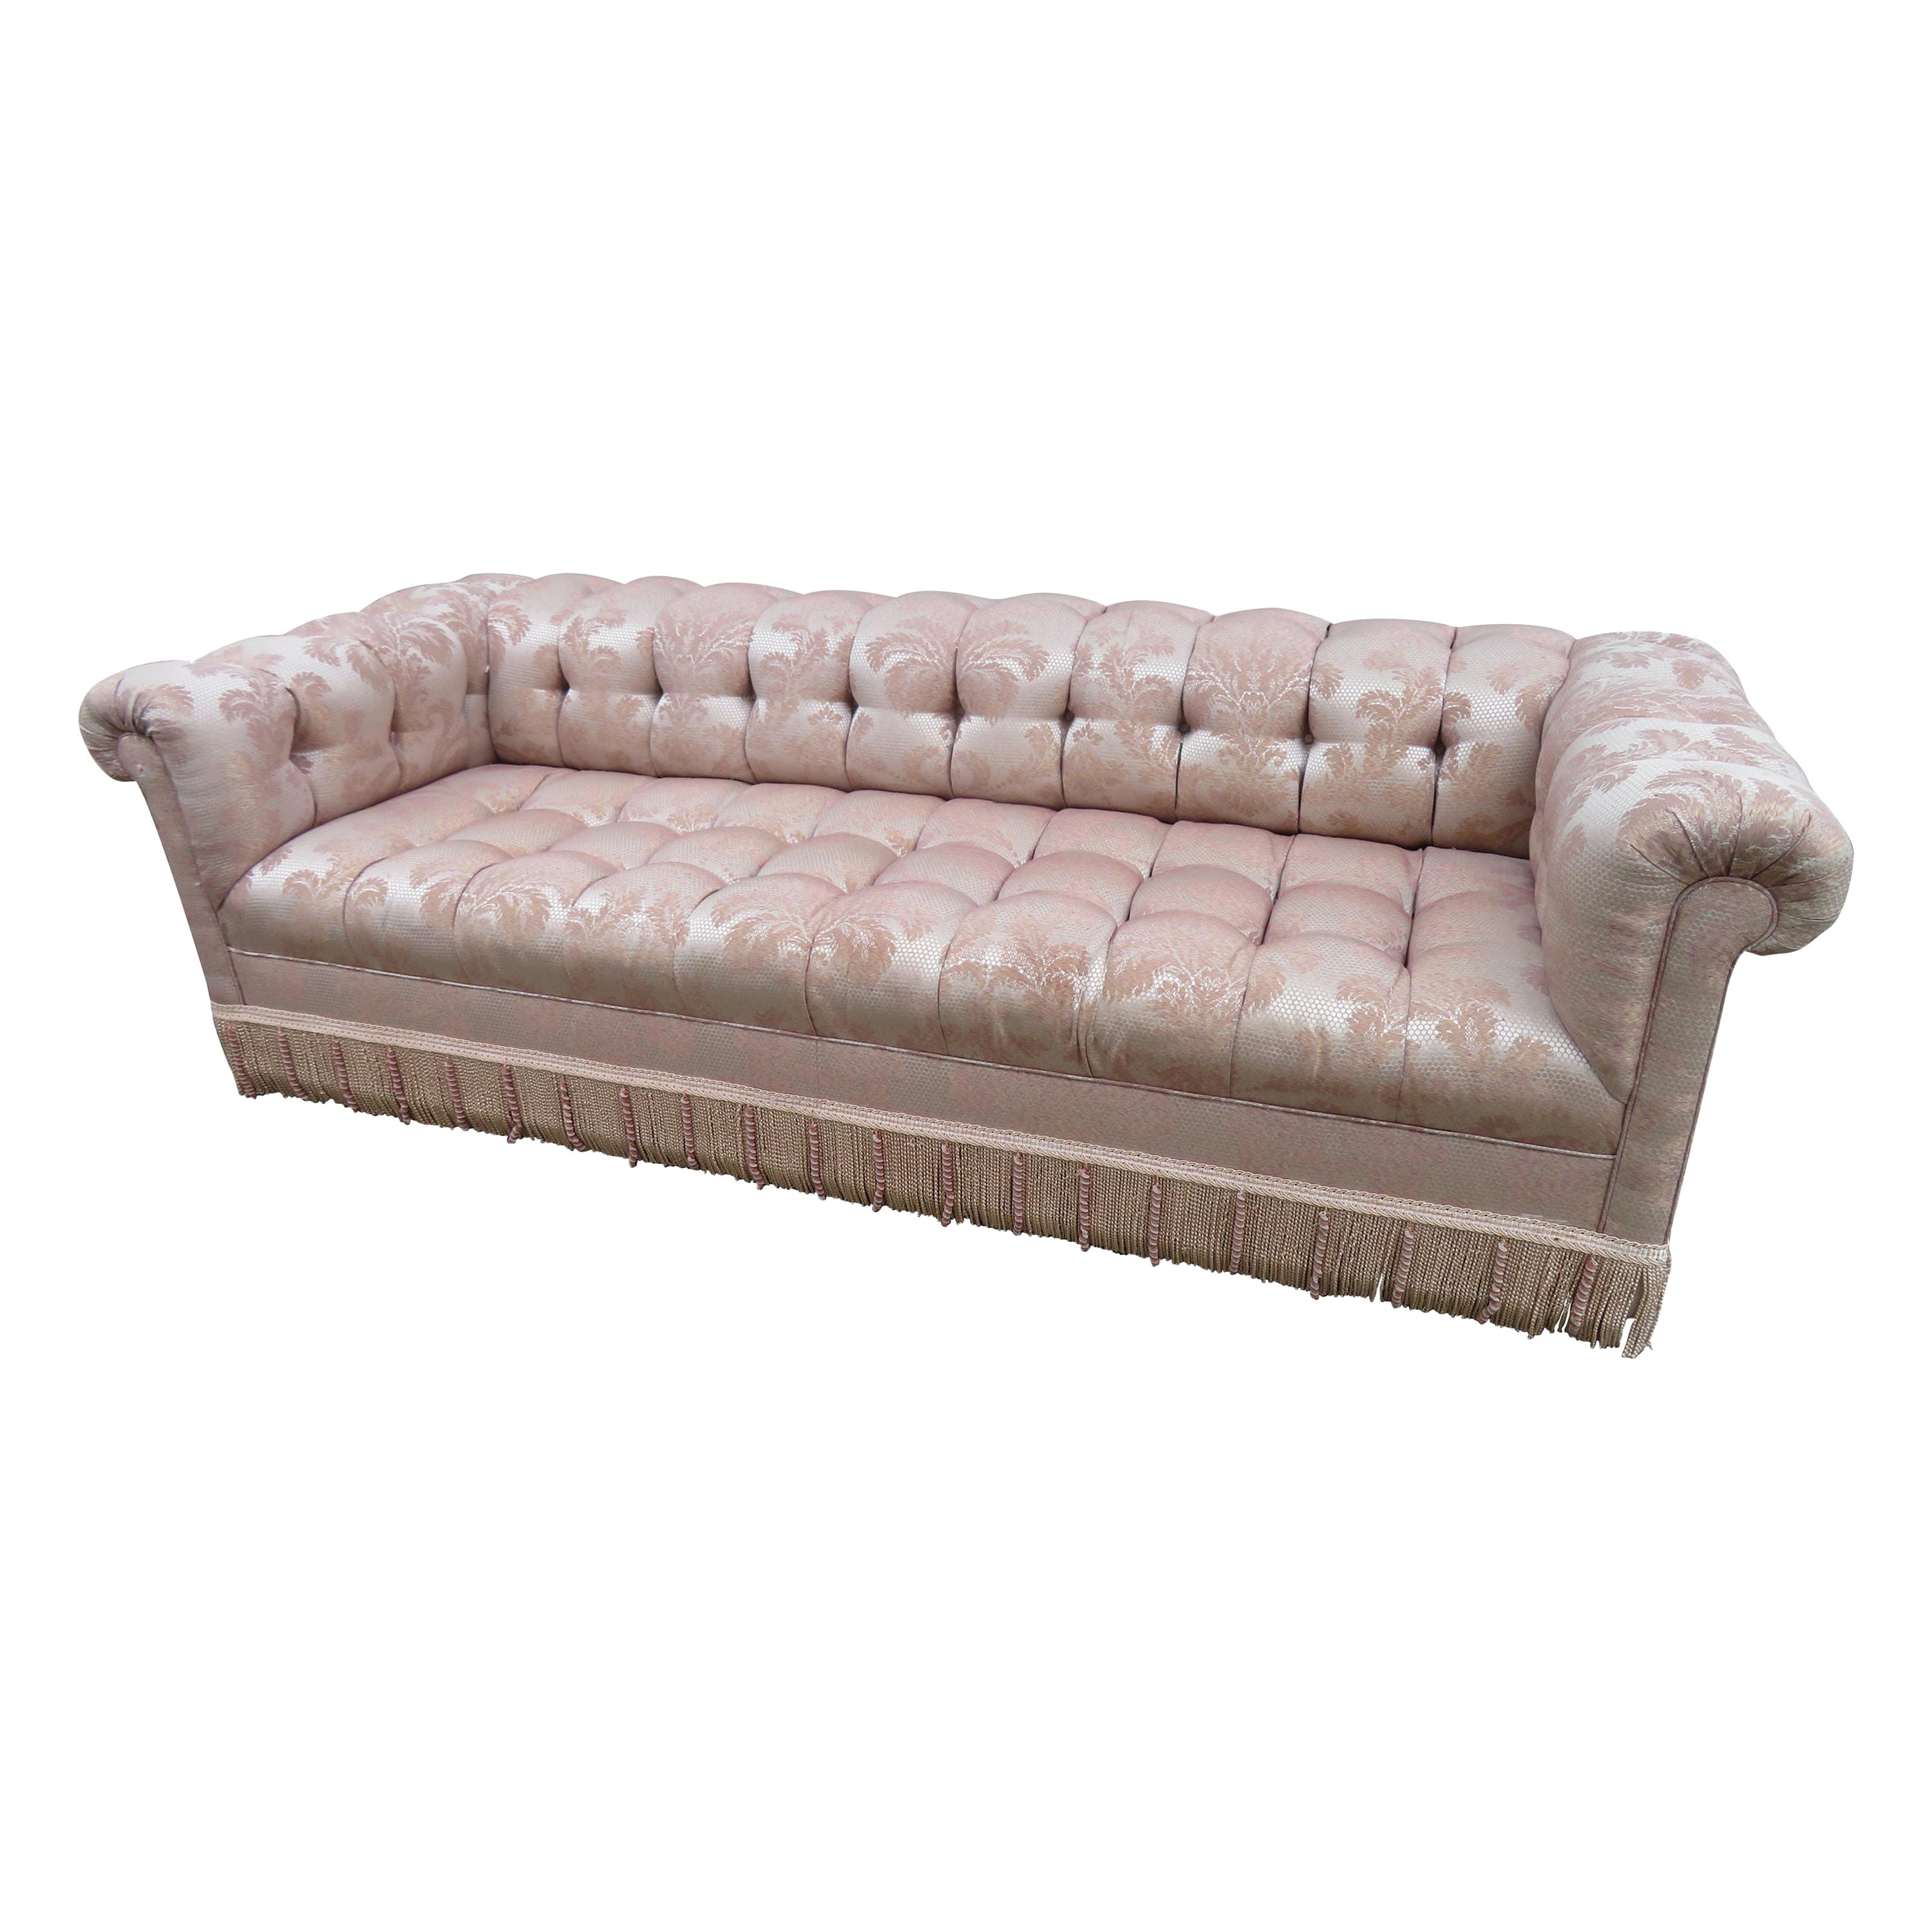 Magnificent Directional Biscuit Tufted Party Sofa Midcentury